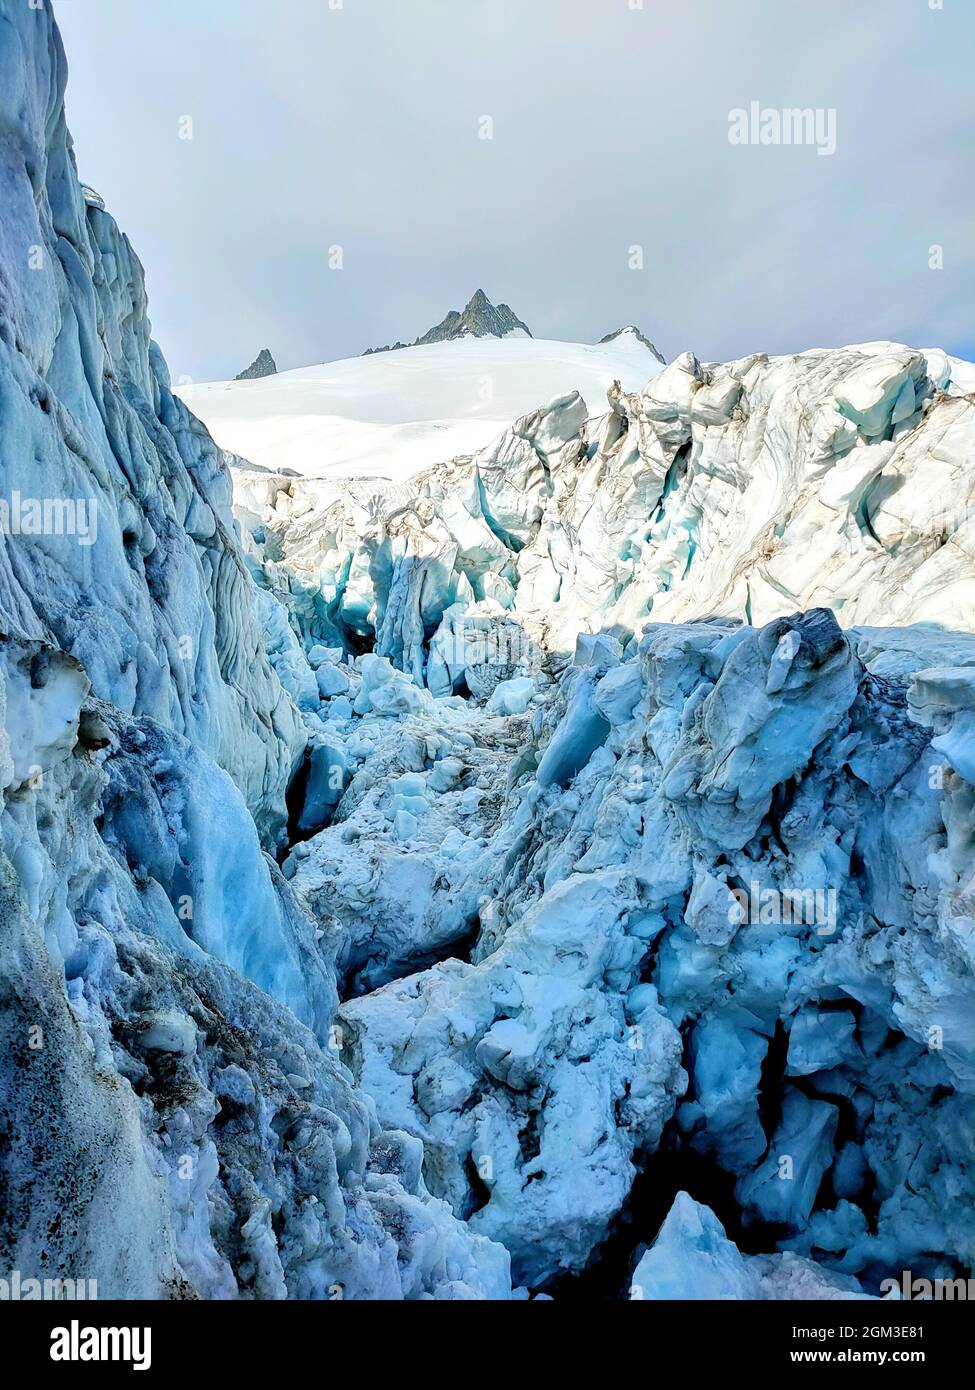 Massiv Icefall. Trientglacier is moving. IceArt Stock Photo